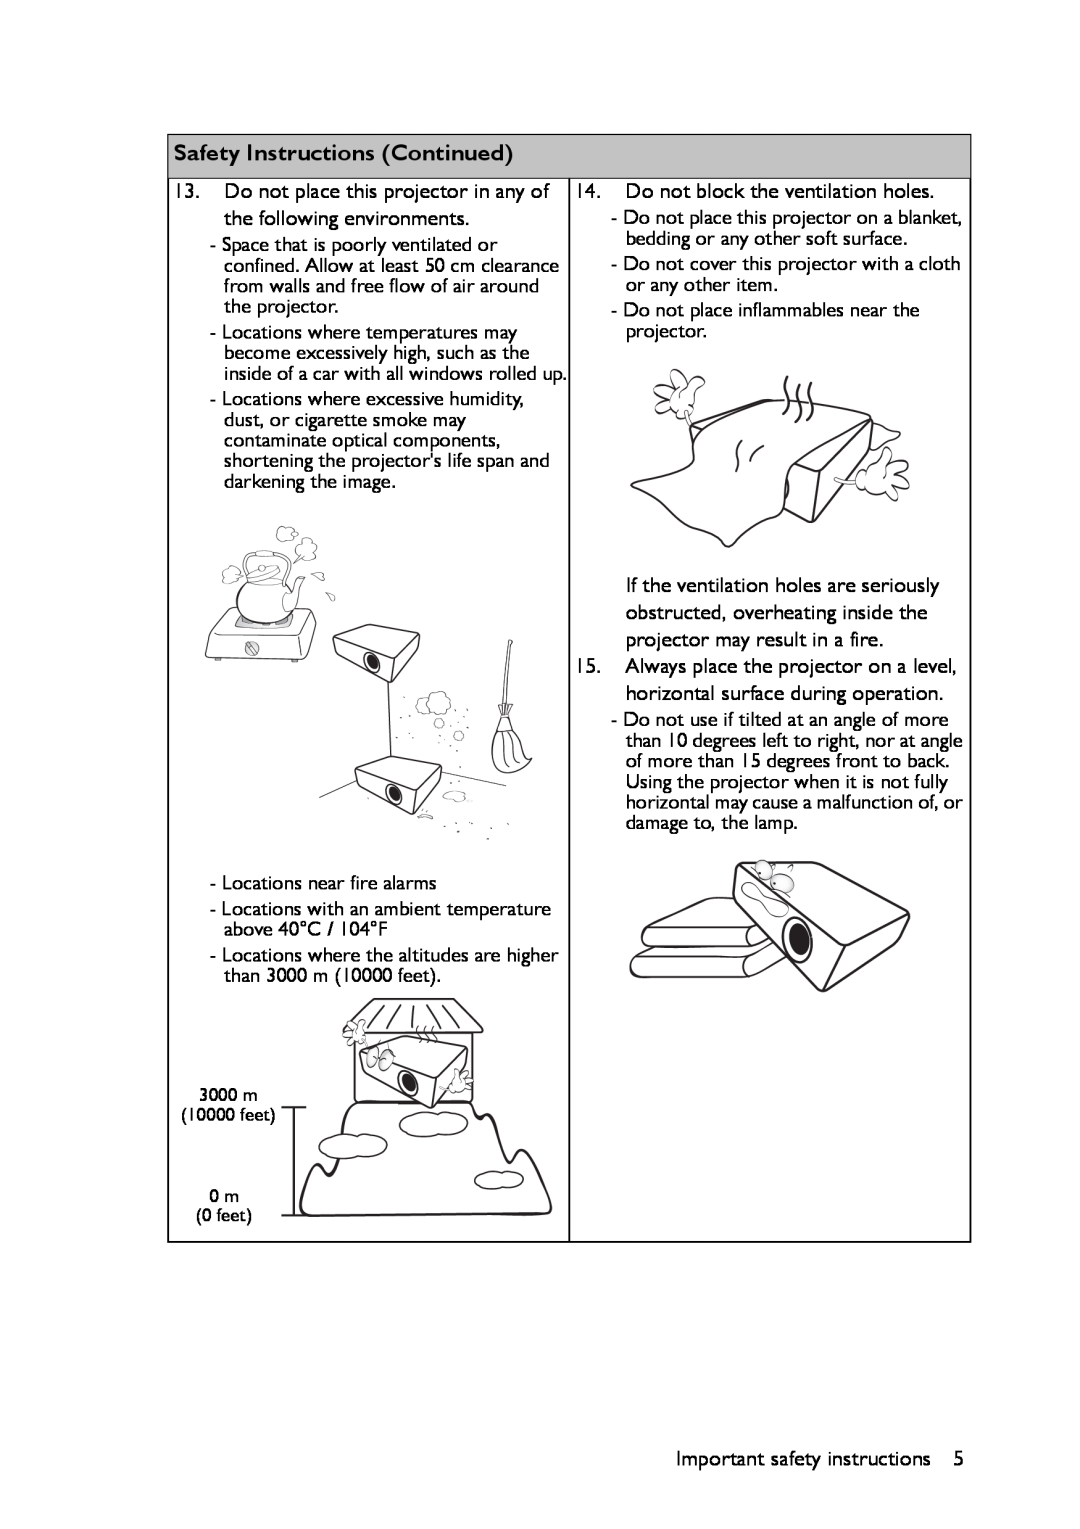 BenQ MX661 user manual Safety Instructions Continued, 3000 m 10000 feet 0 m 0 feet 